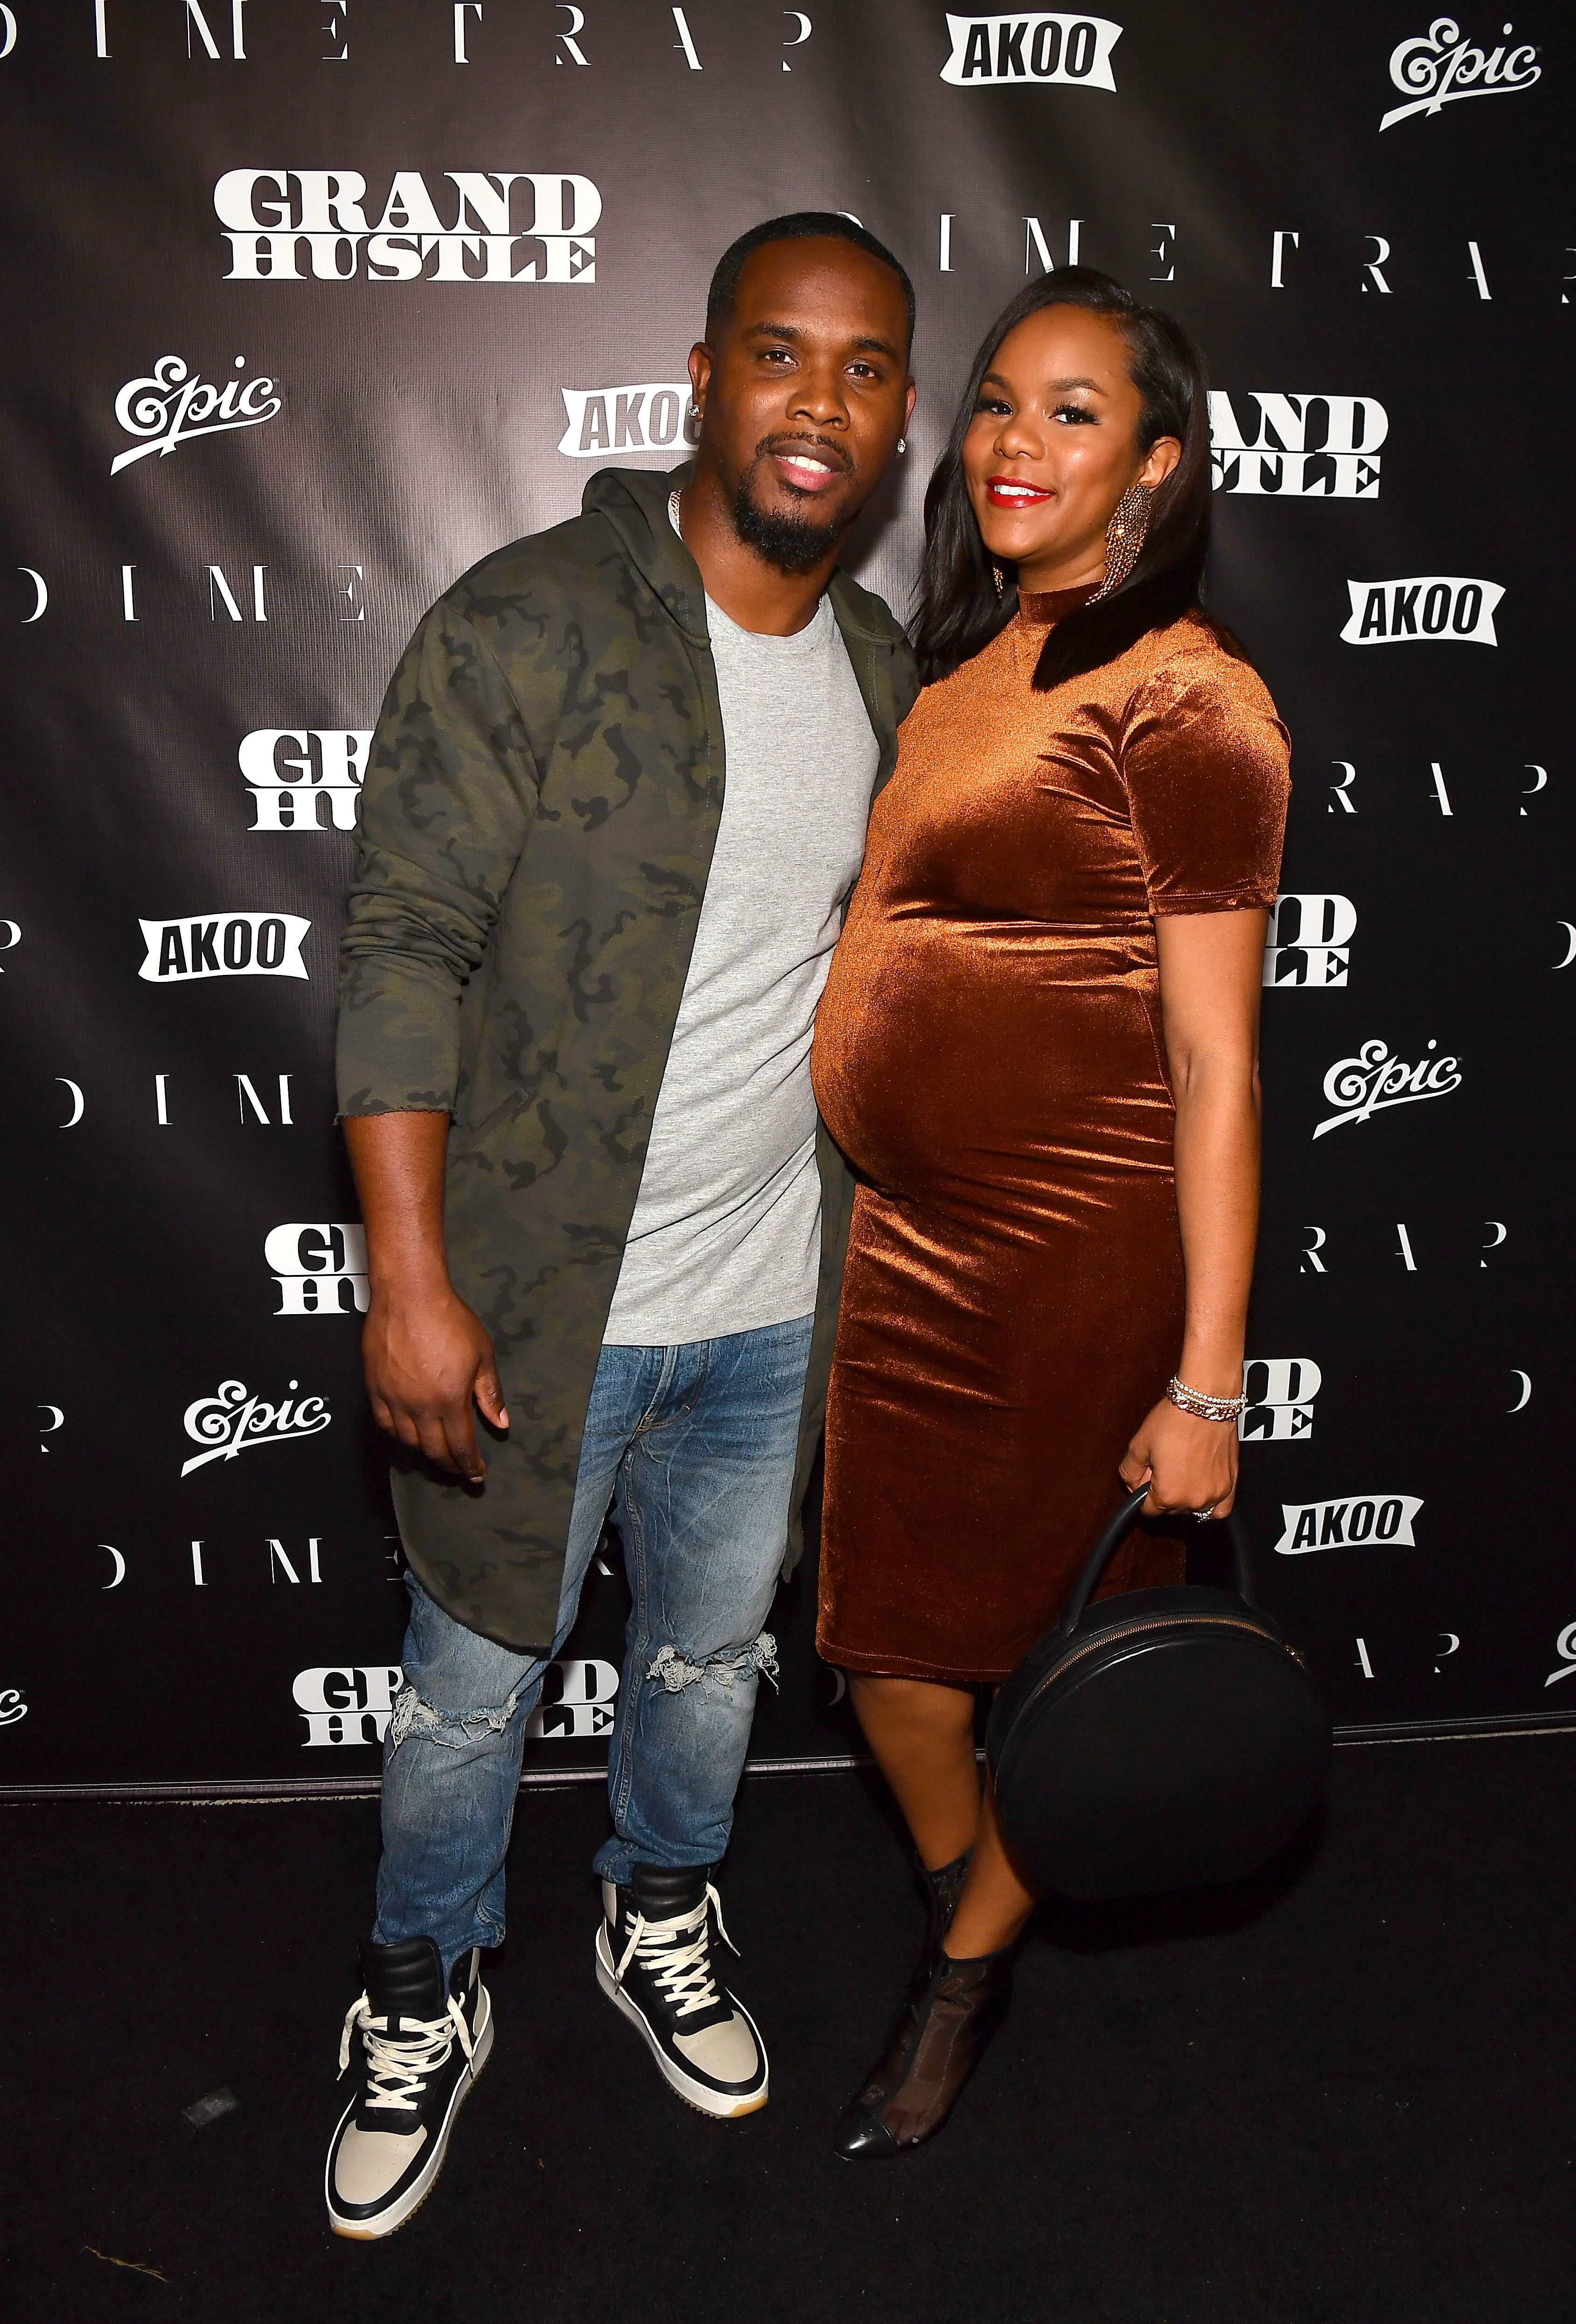 LeToya Luckett and husband Tommicus Walker at the "Grand Hussle" premier in 2018/ Source: Getty Images